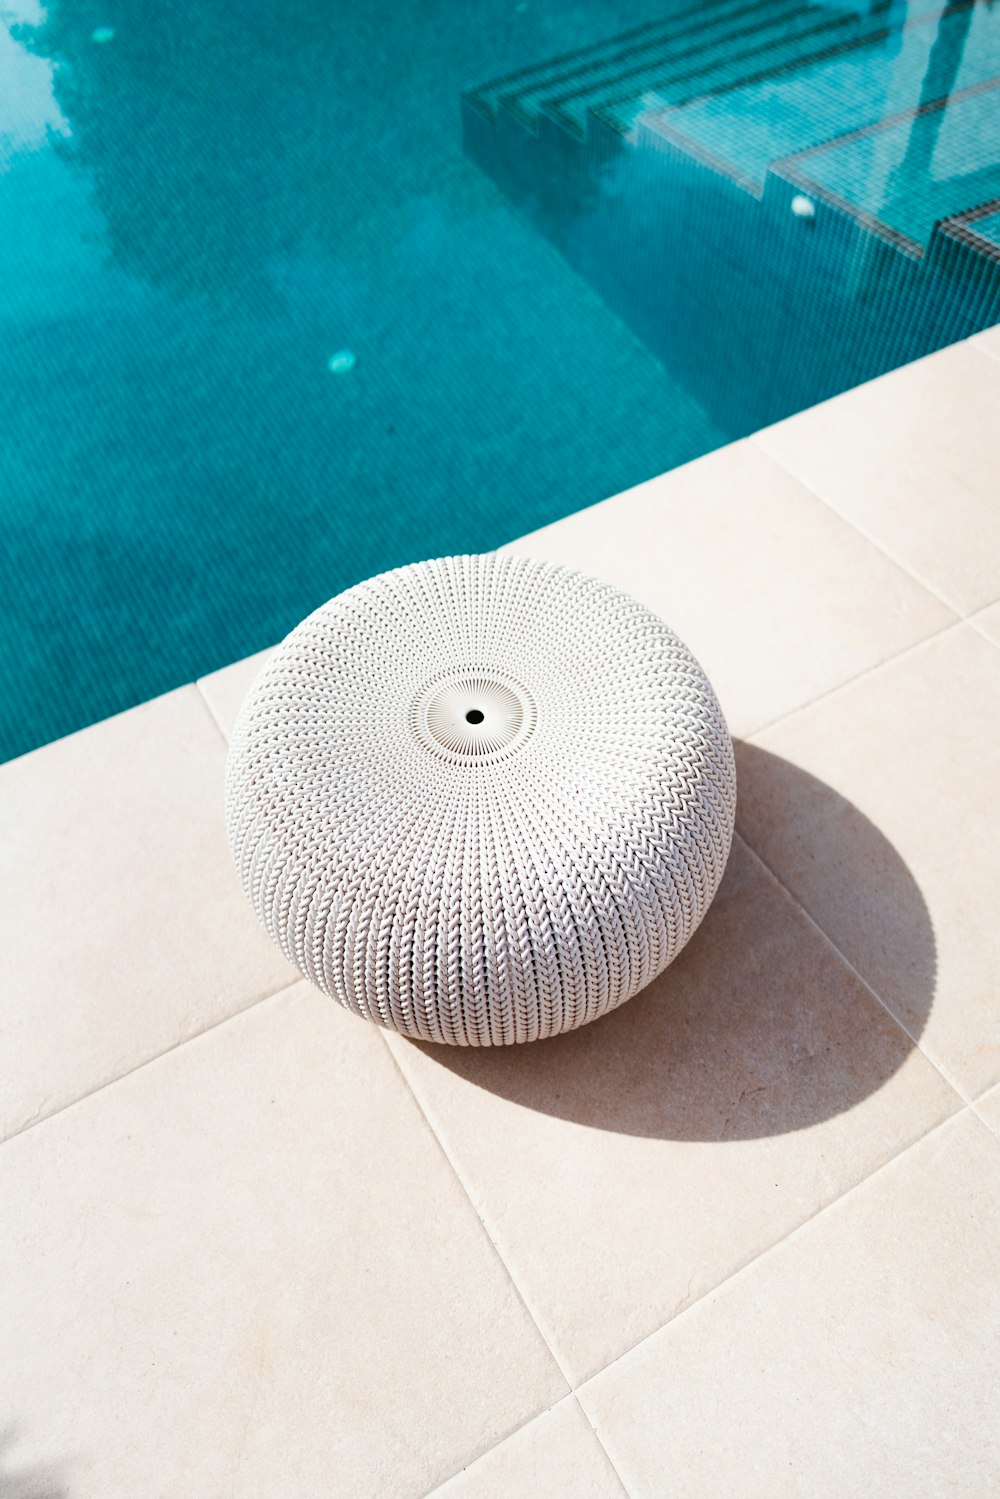 a white round object sitting on the ground next to a swimming pool